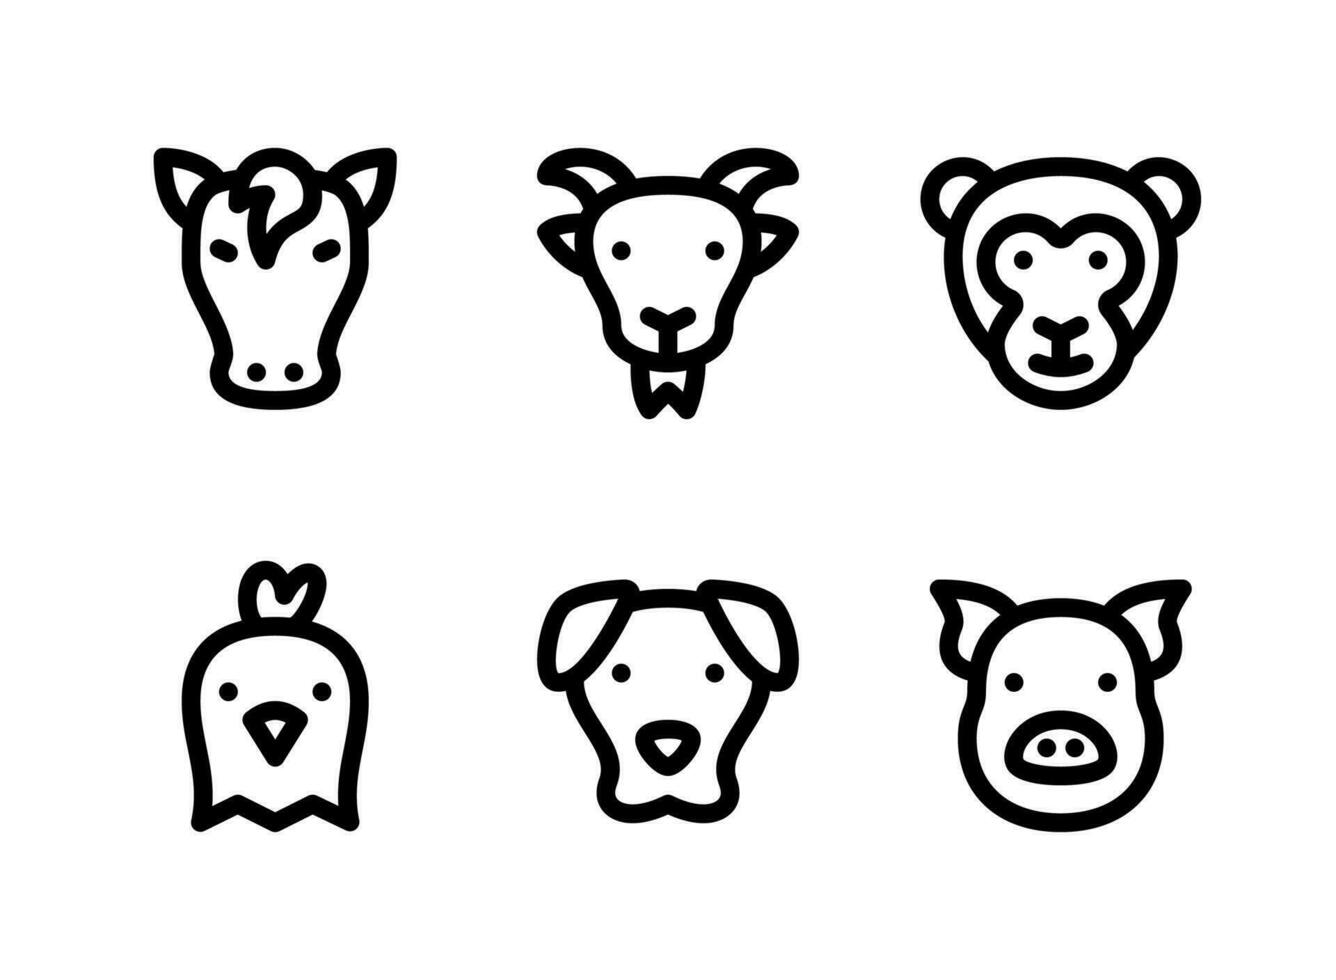 Simple Set of Animals Related Vector Line Icons. Contains Icons as Horse, Goat, Monkey and more.